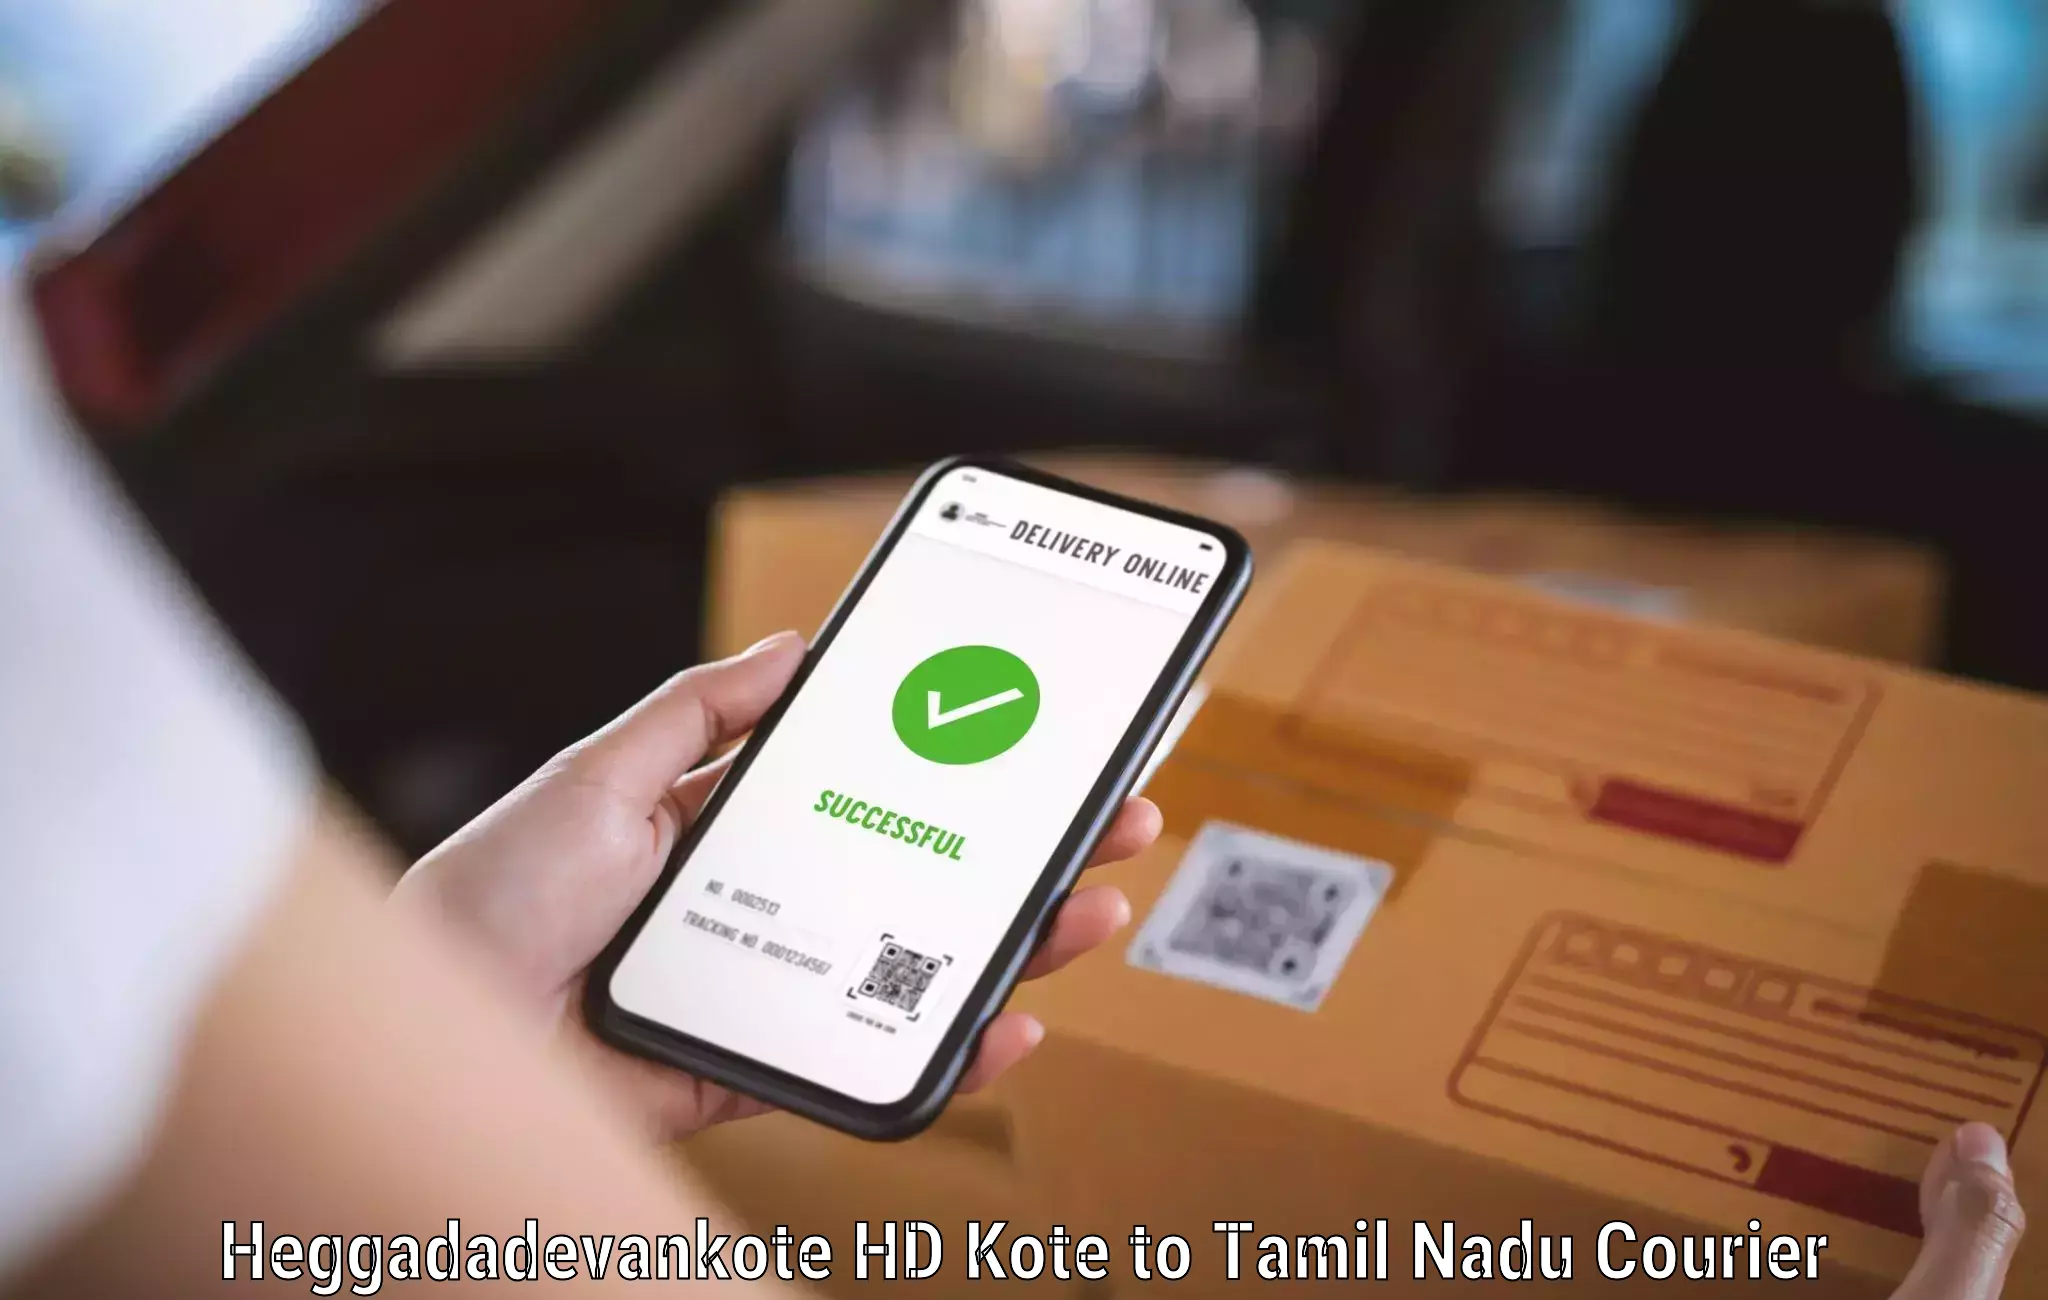 On-call courier service Heggadadevankote HD Kote to Sirkali